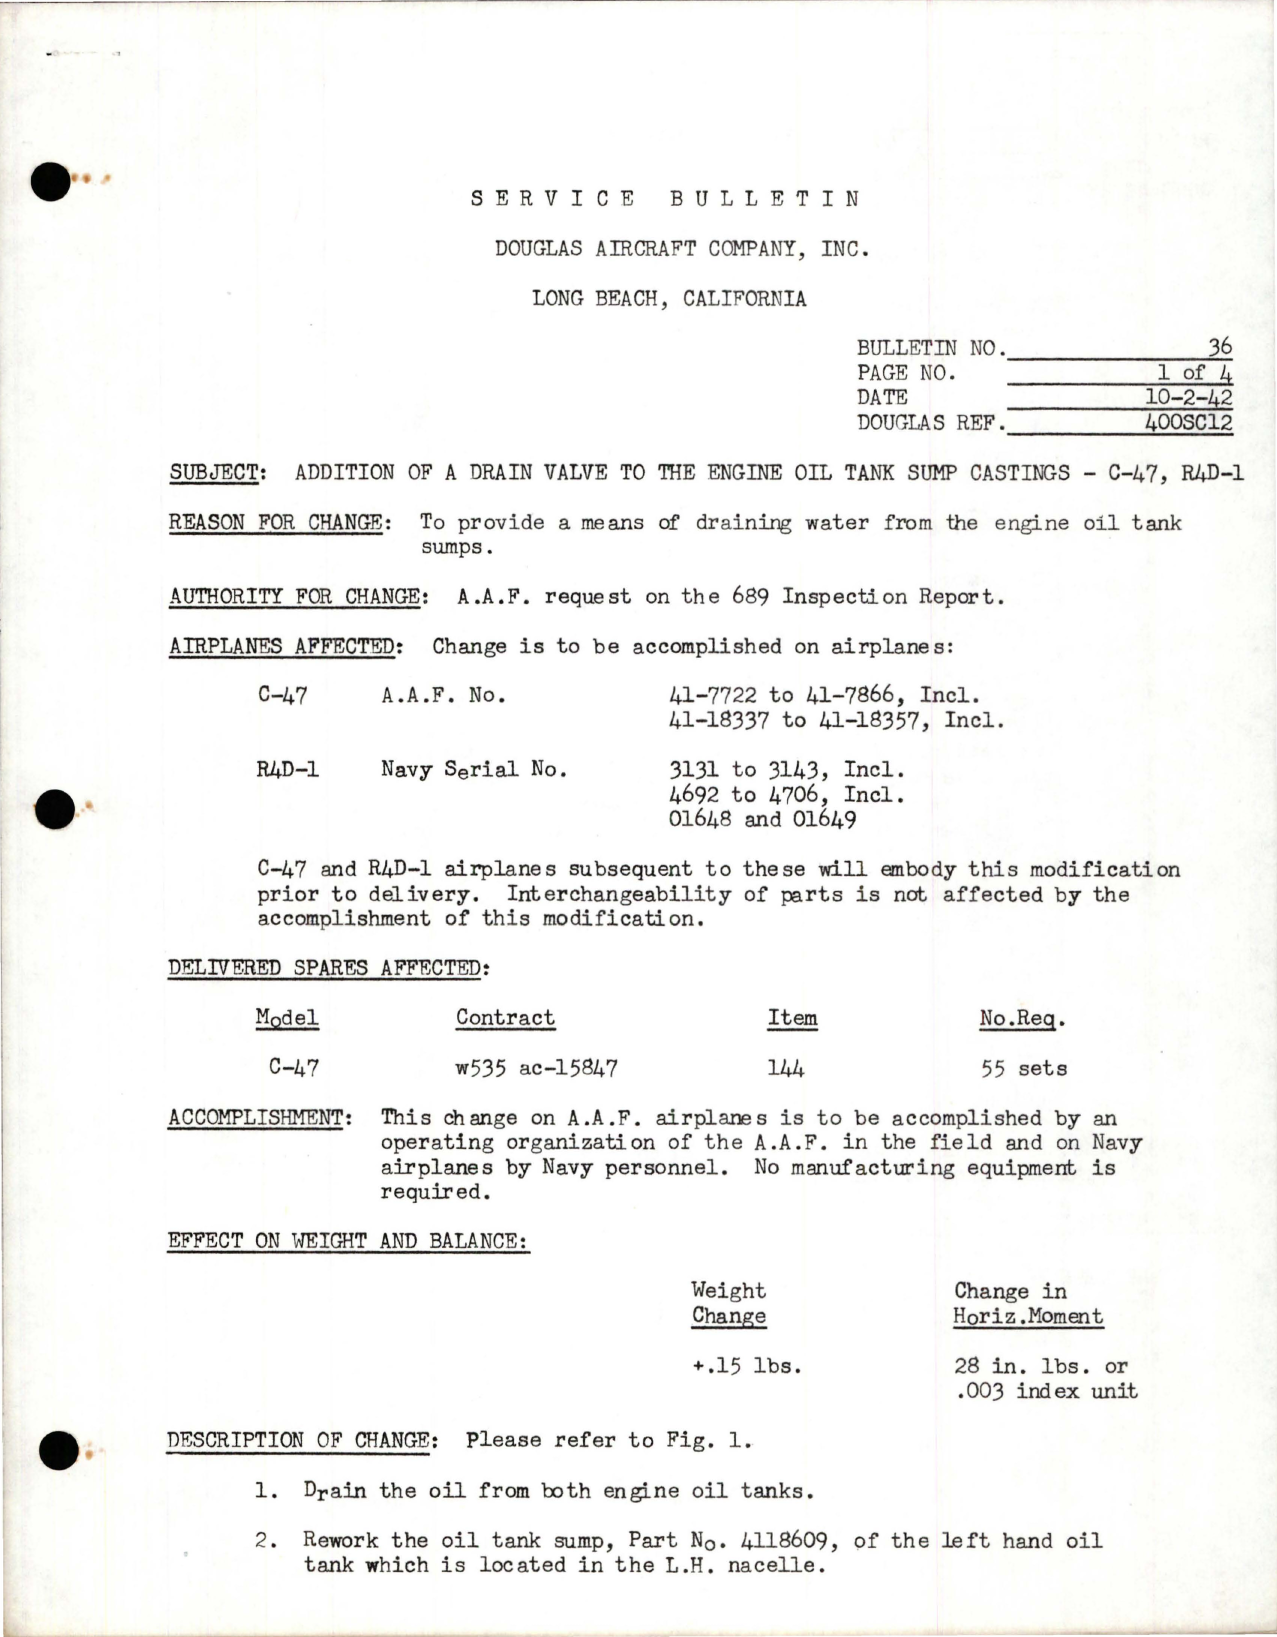 Sample page 1 from AirCorps Library document: Addition of a Drain Valve to the Engine Oil Tank Sump Castings